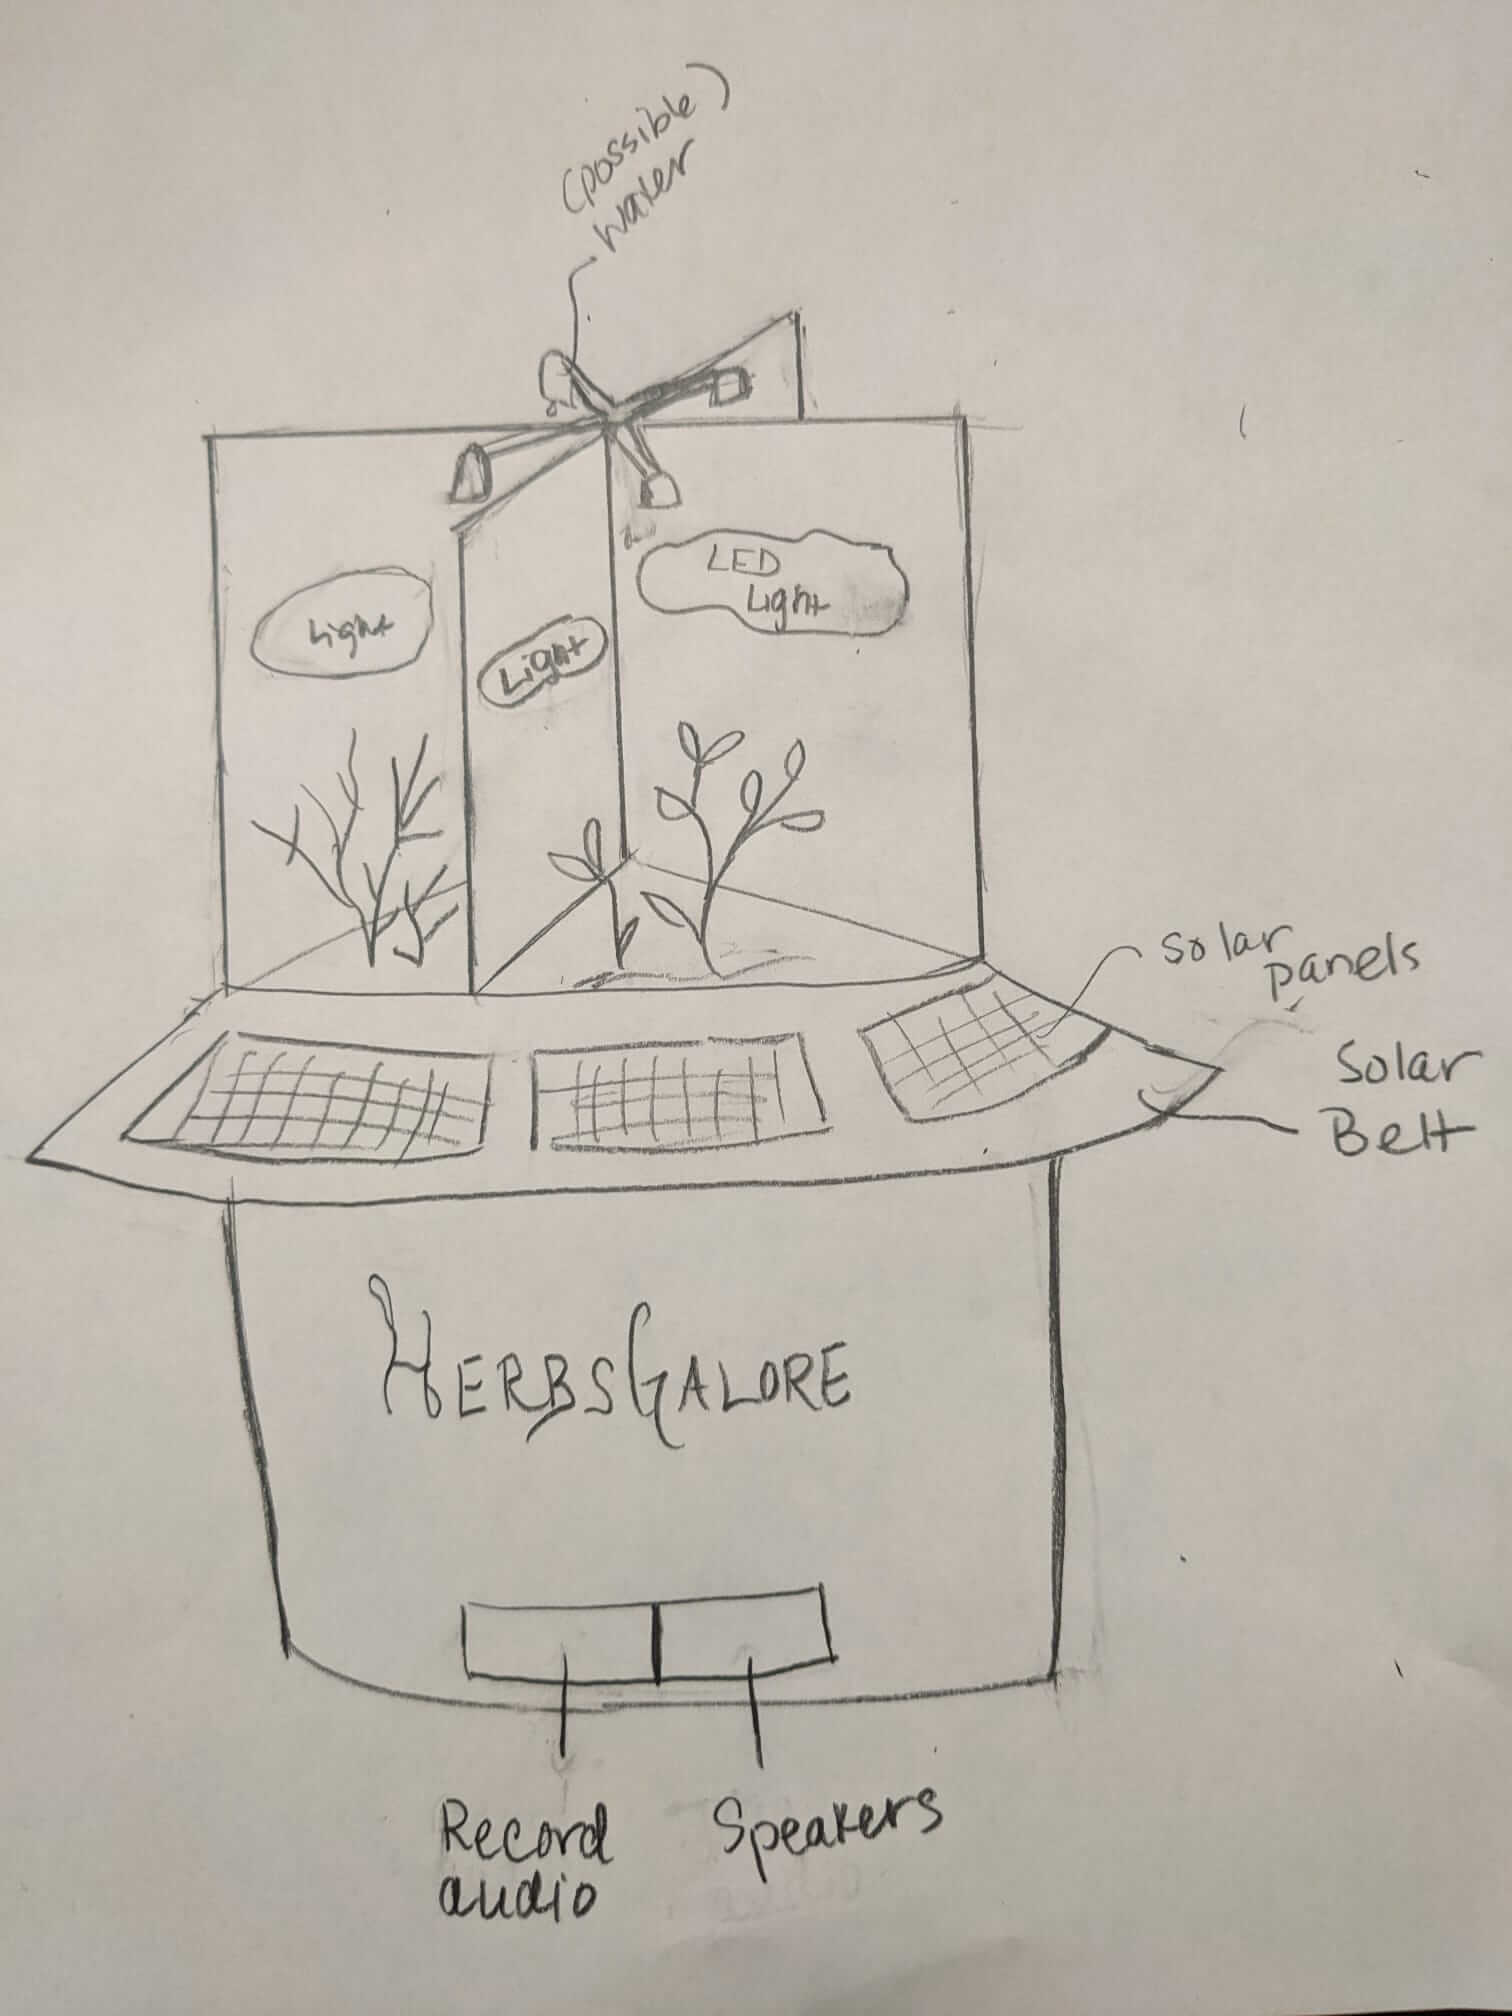 Hand sketch of Herbs Galore, a segmented herb garden with solar powered lights, sound and water